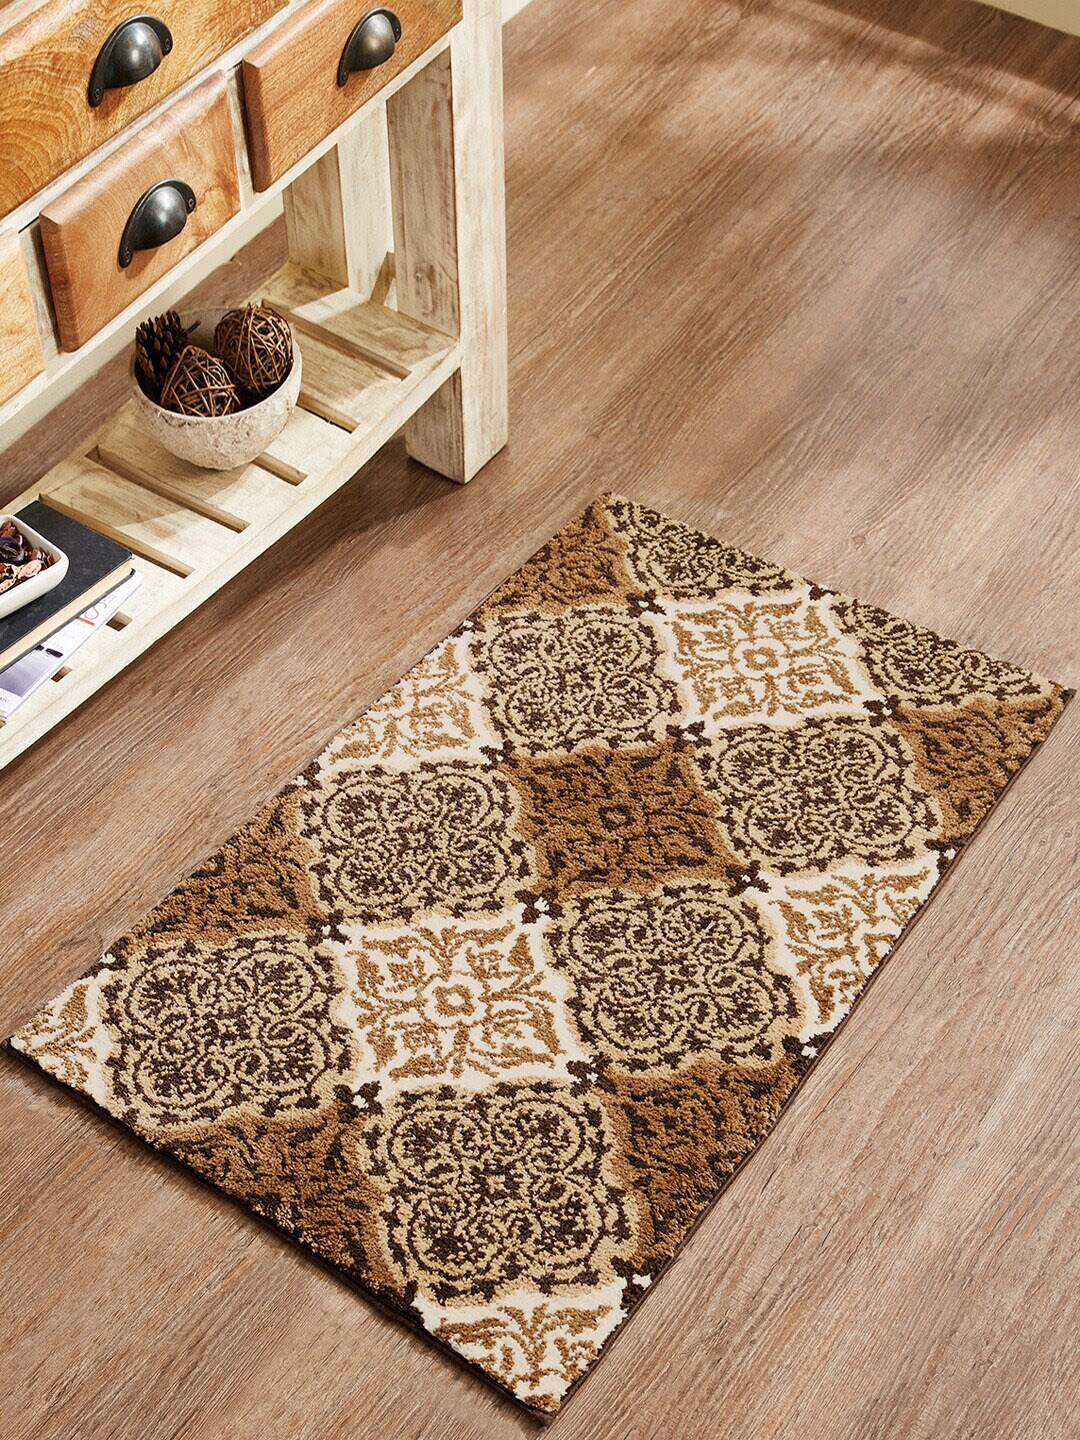 Pano Brown Bath Rugs Price in India